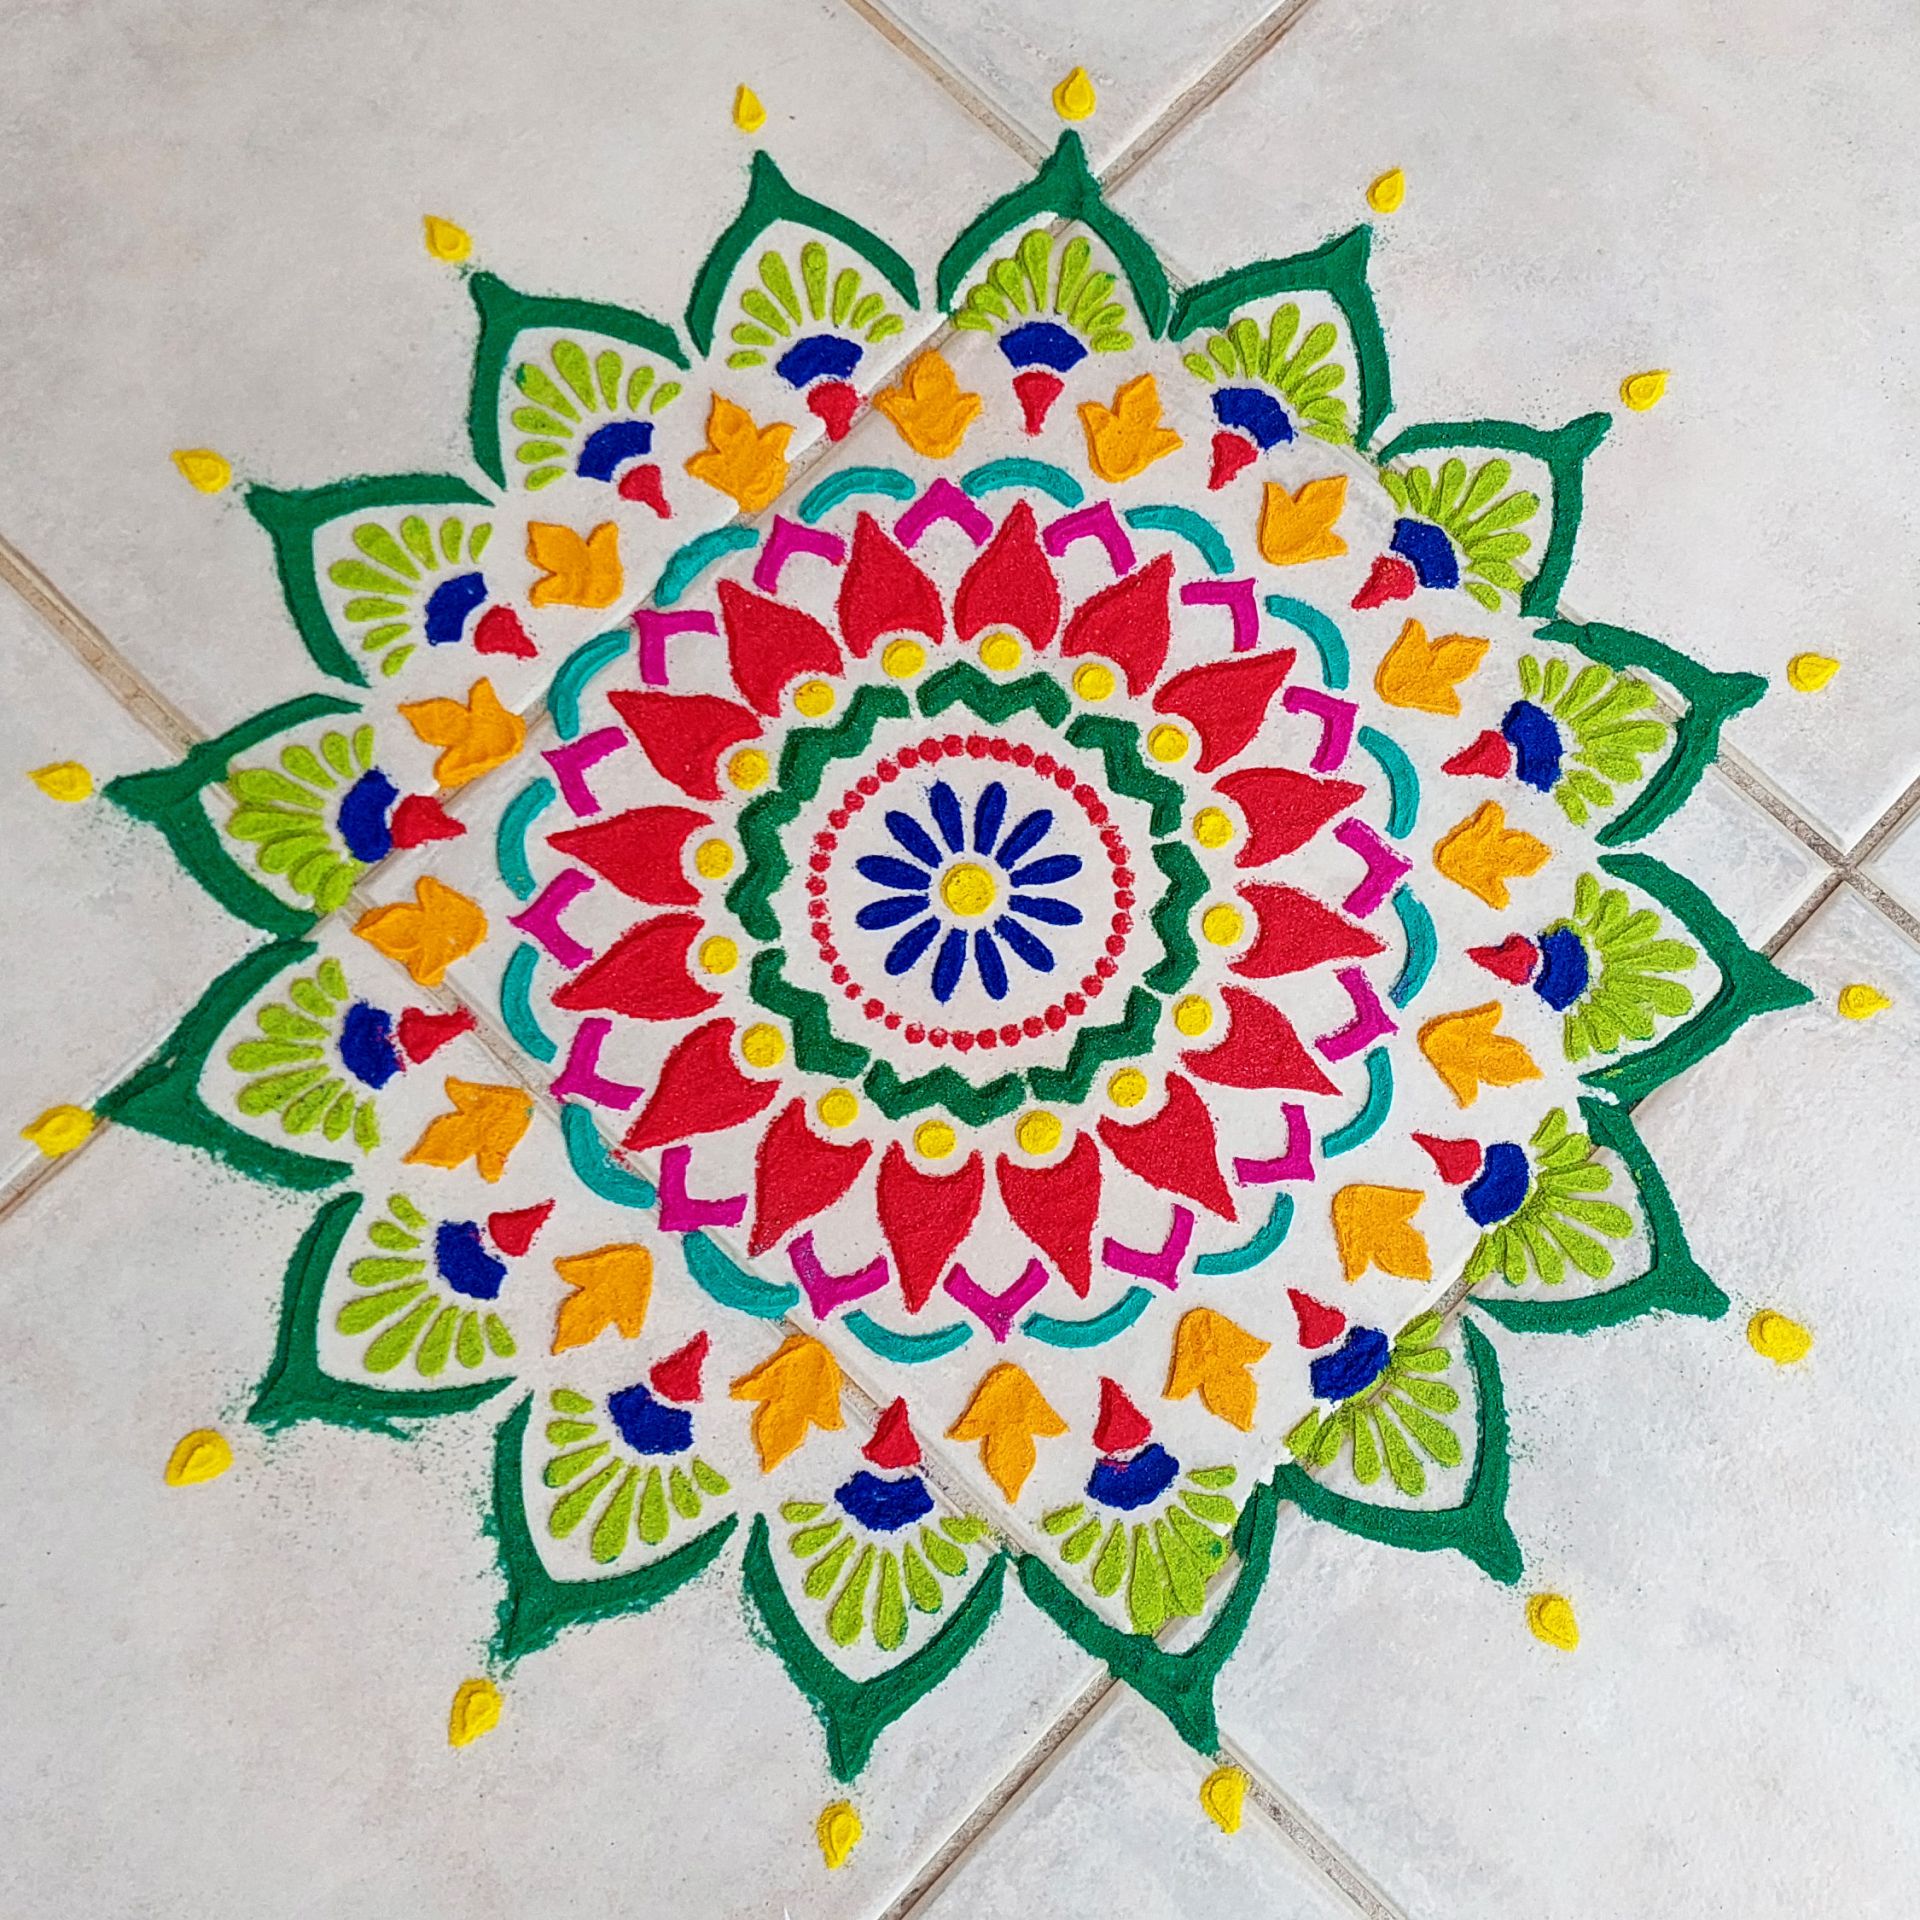 Diwali Lights Competition - Rangoli Category (Third Place)